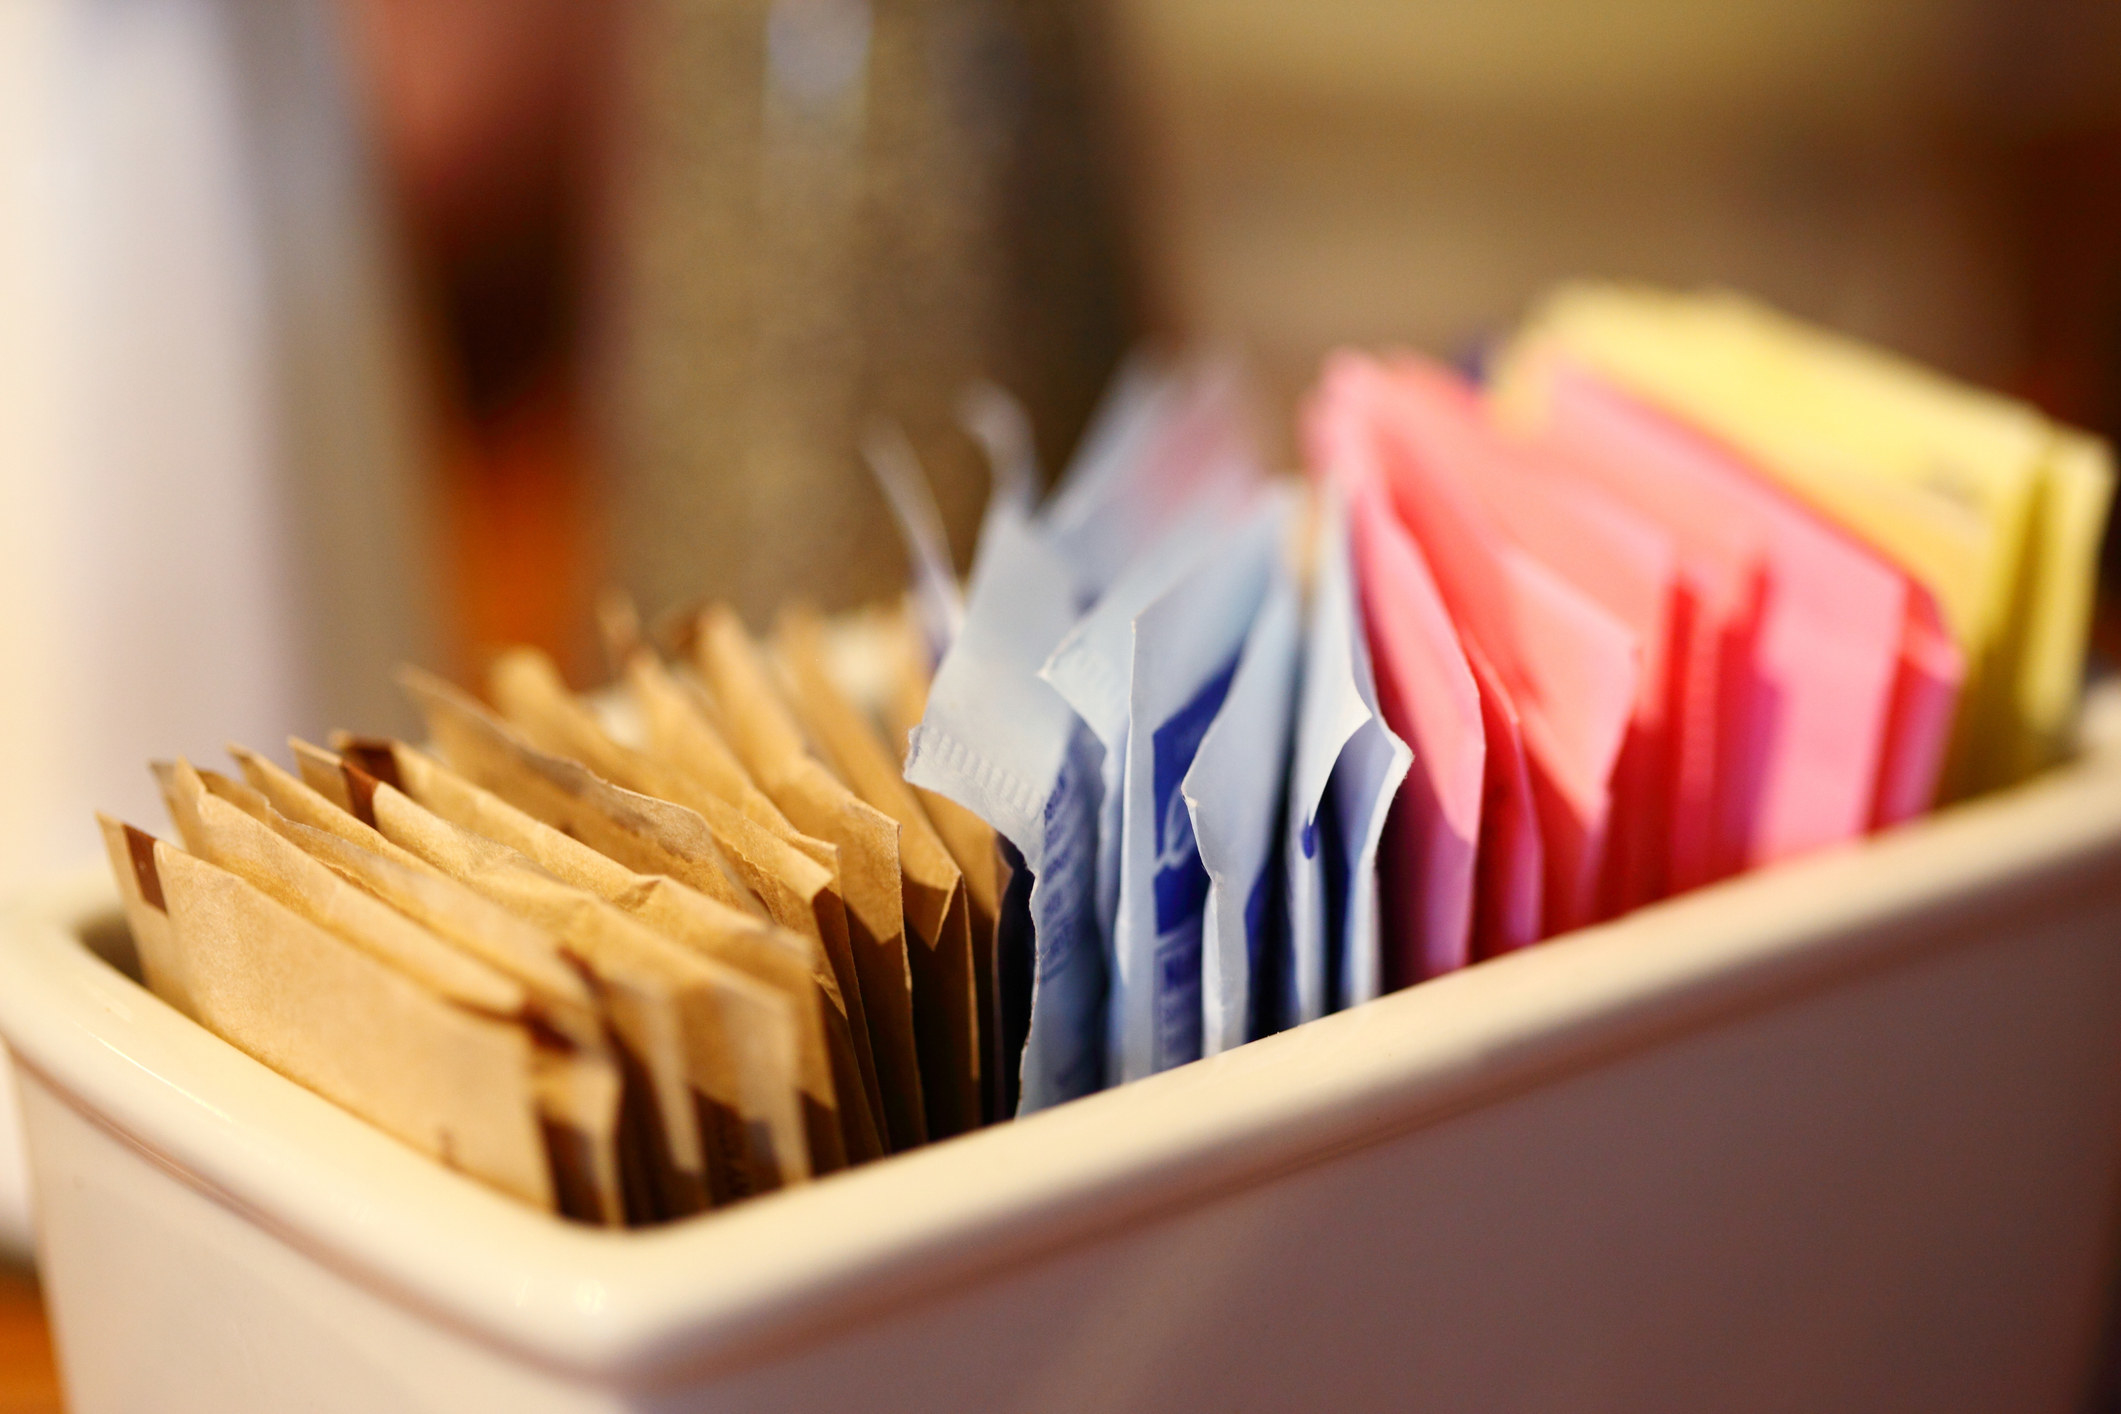 Sweetener packets In a restaurant container